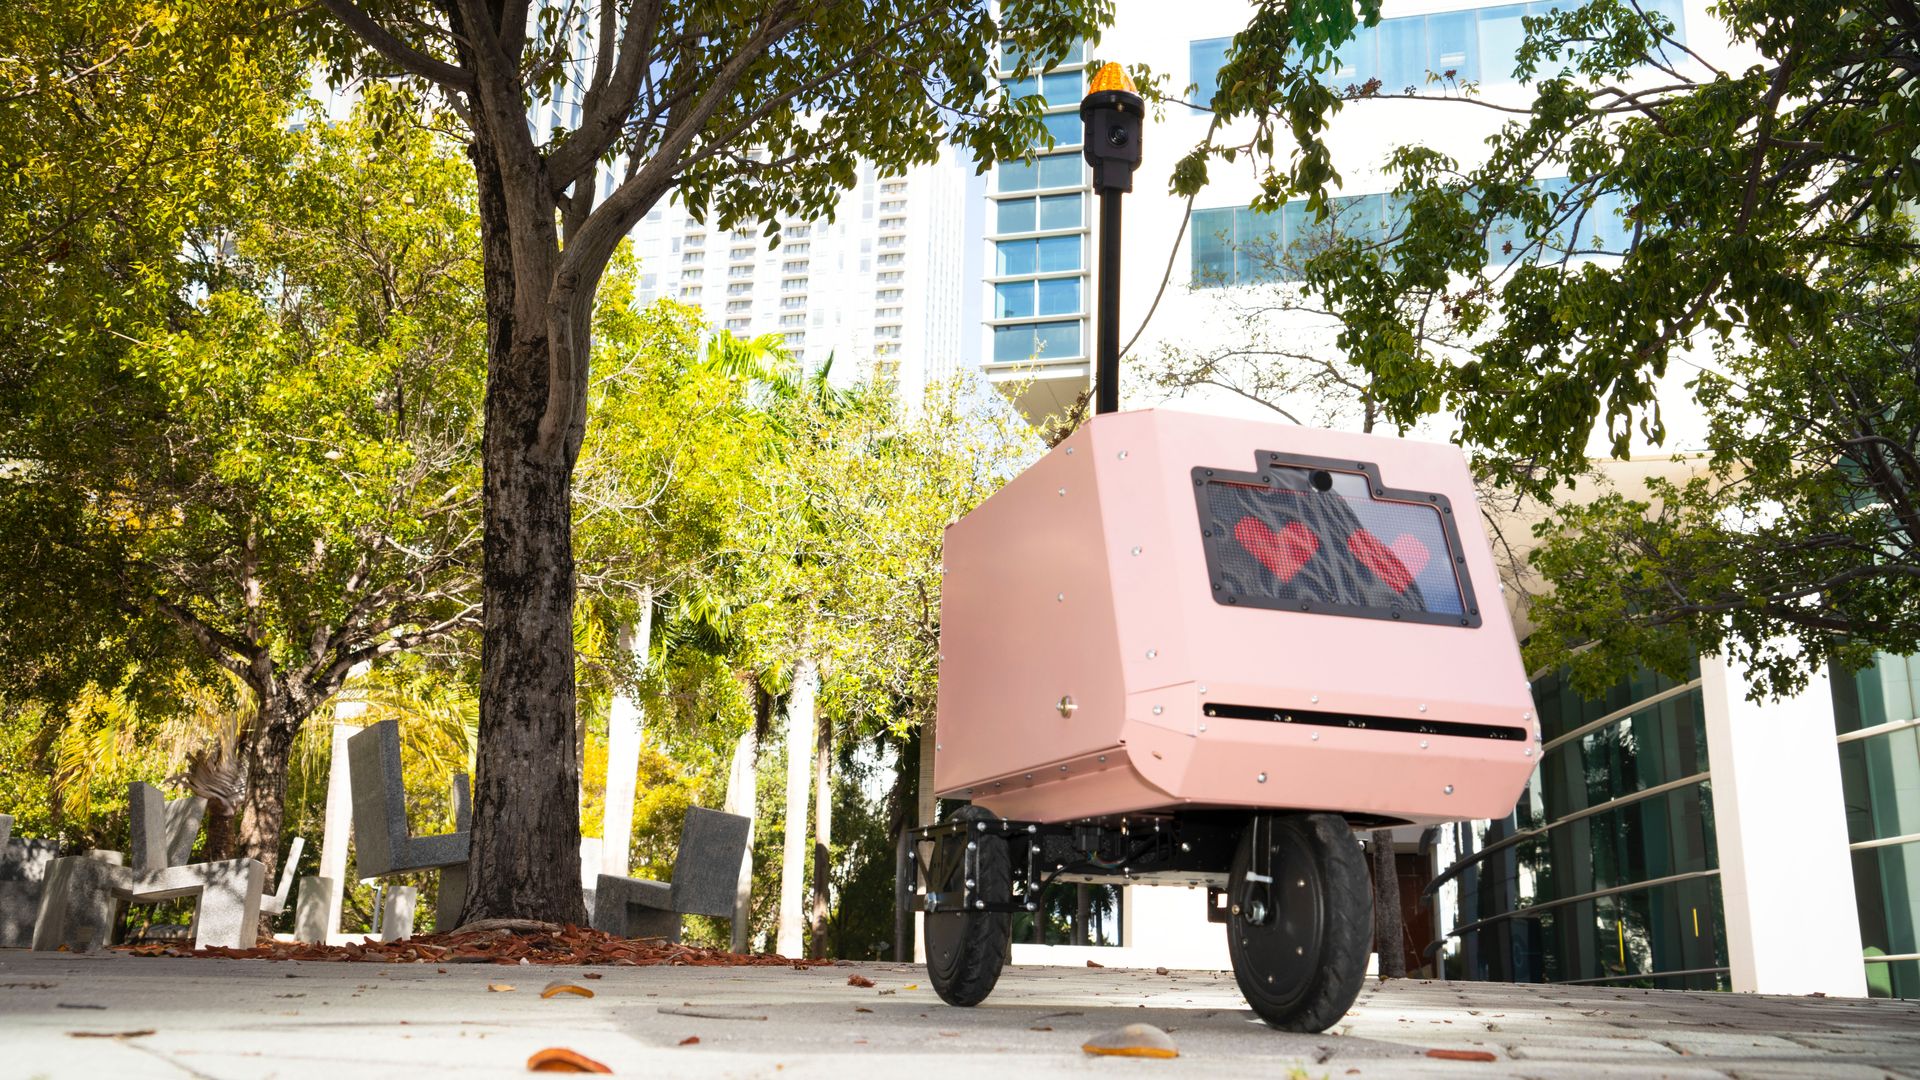 A three-wheeled remote-control robot with heart eyes and a pink exterior.